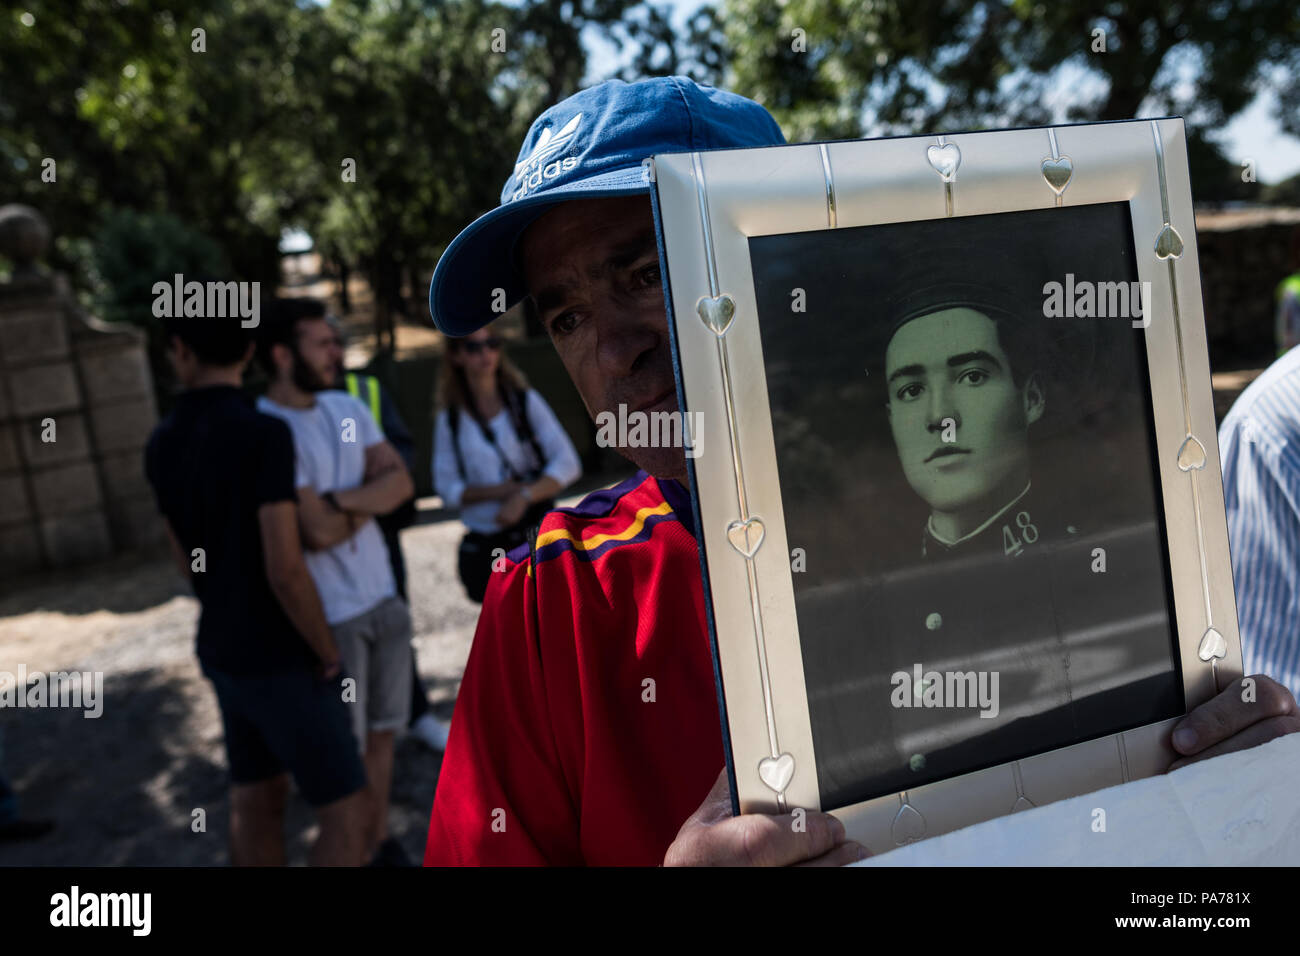 San Lorenzo del Escorial, Madrid, Spain. 21st July 2018. A man shows a picture of his grandfather who was killed by Franco's army in Malaga during the Spanish civil war, during a protest at the entrance of "Valle de los Caidos" (Valley of the Fallen) monument to demand the removal of Franco and Primo de Rivera's remains, in San Lorenzo del Escorial, Madrid, Spain. Credit: Marcos del Mazo/Almy Live News Stock Photo